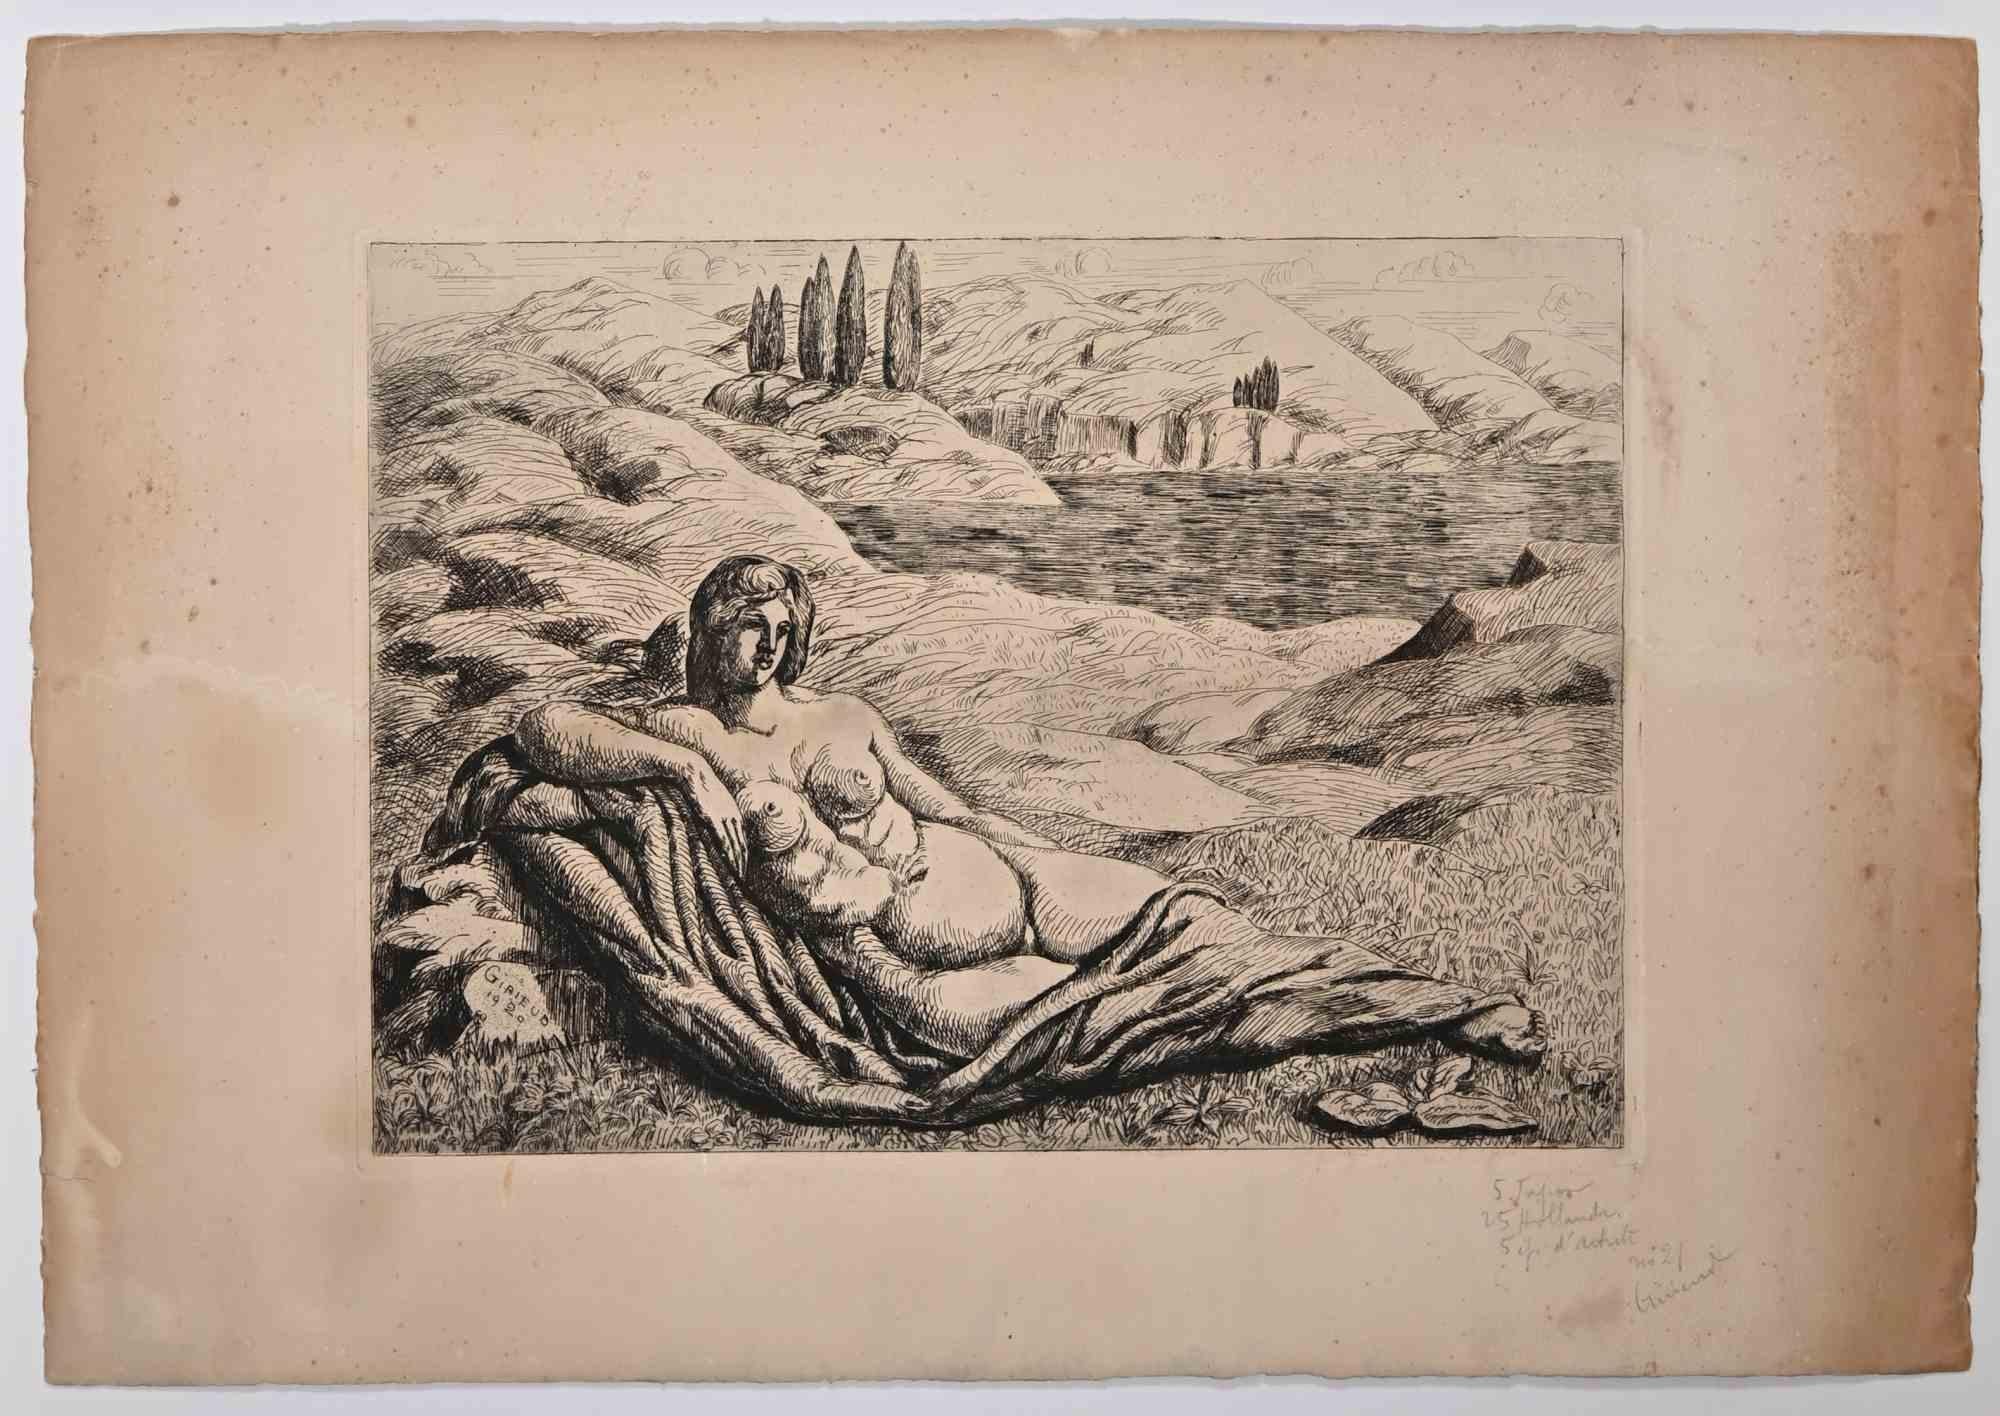 Etching realized by Pierre Girieud (1876-1940).

Good condition with foxing, on a yellowed paper included a white cardboard passpartout (50 x 70 cm).

Hand signed on the lower right corner.

Pierre Girieud was a French painter (Marseille 1875 -